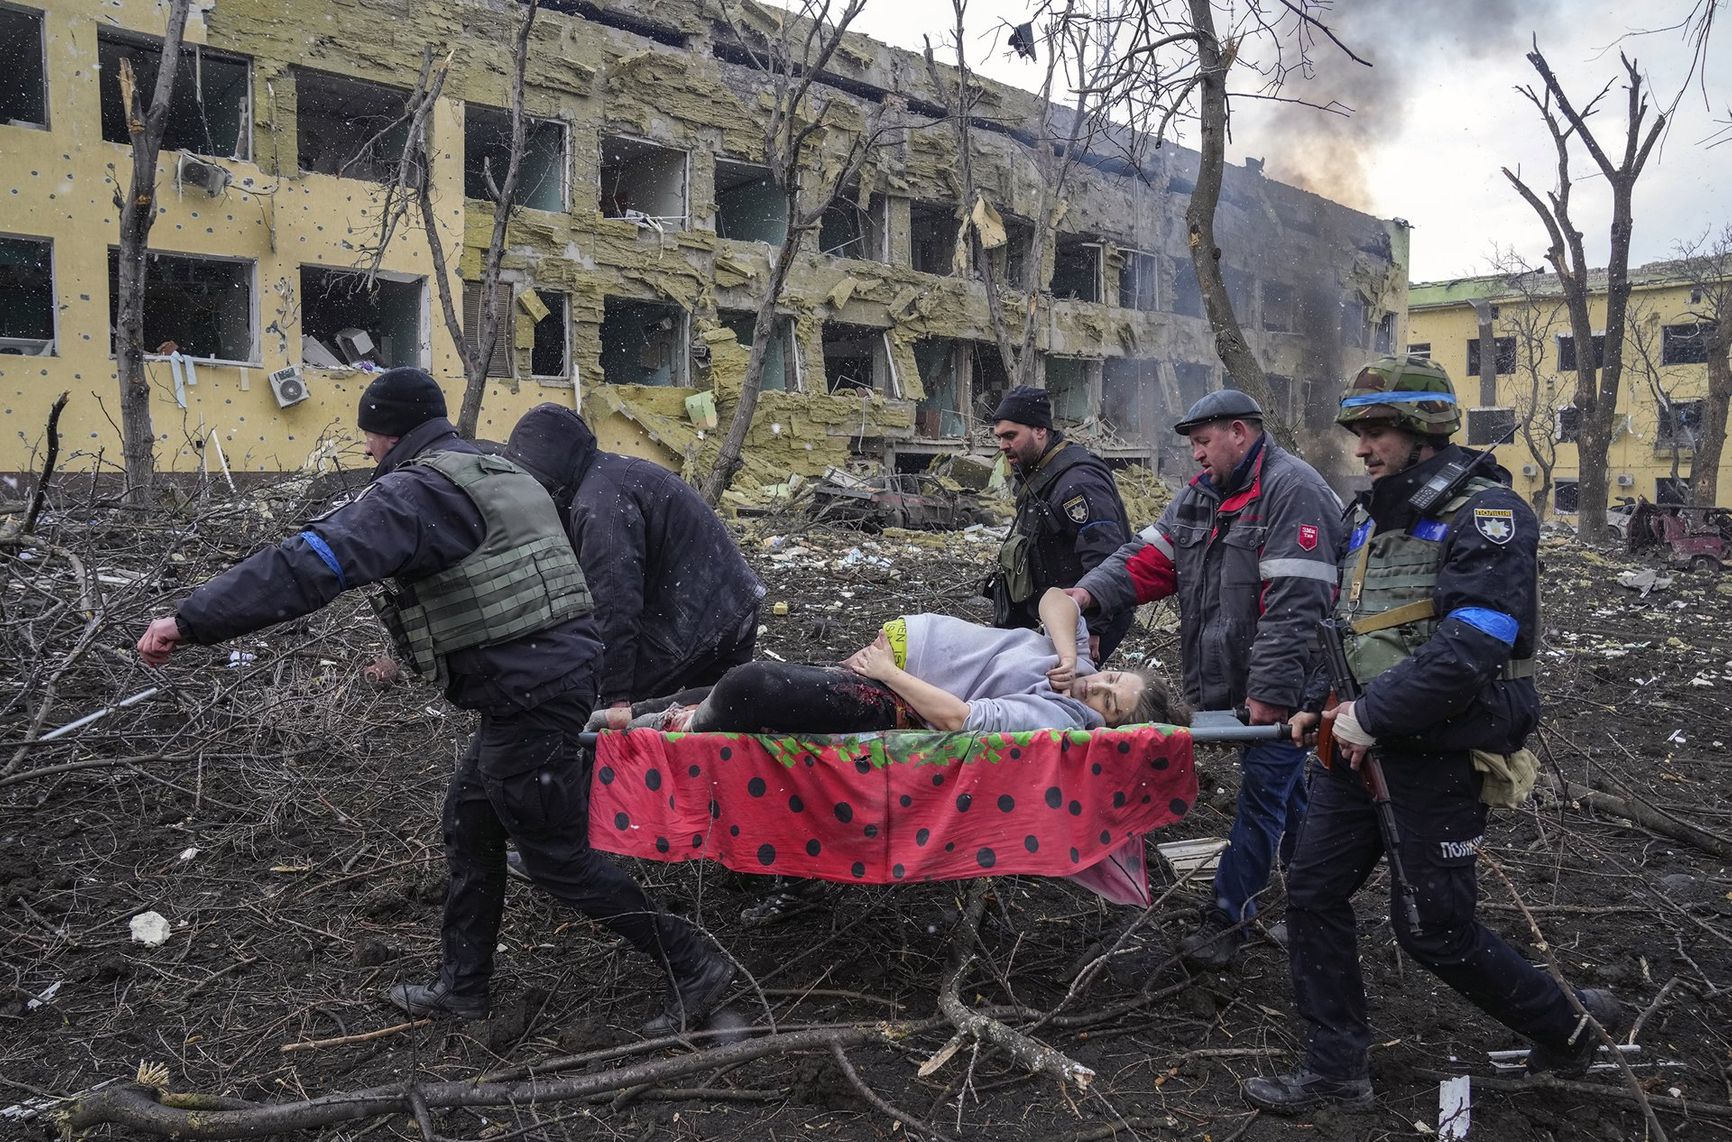 Iryna Kalinina (32), an injured pregnant woman, is carried from a maternity hospital that was damaged during a Russian airstrike in Mariupol, Ukraine. Her baby, named Miron (after the word for ‘peace’) was stillborn, and half an hour later Iryna died as well. An OSCE report concluded the hospital was deliberately targeted by Russia, resulting in three deaths and some 17 injuries.